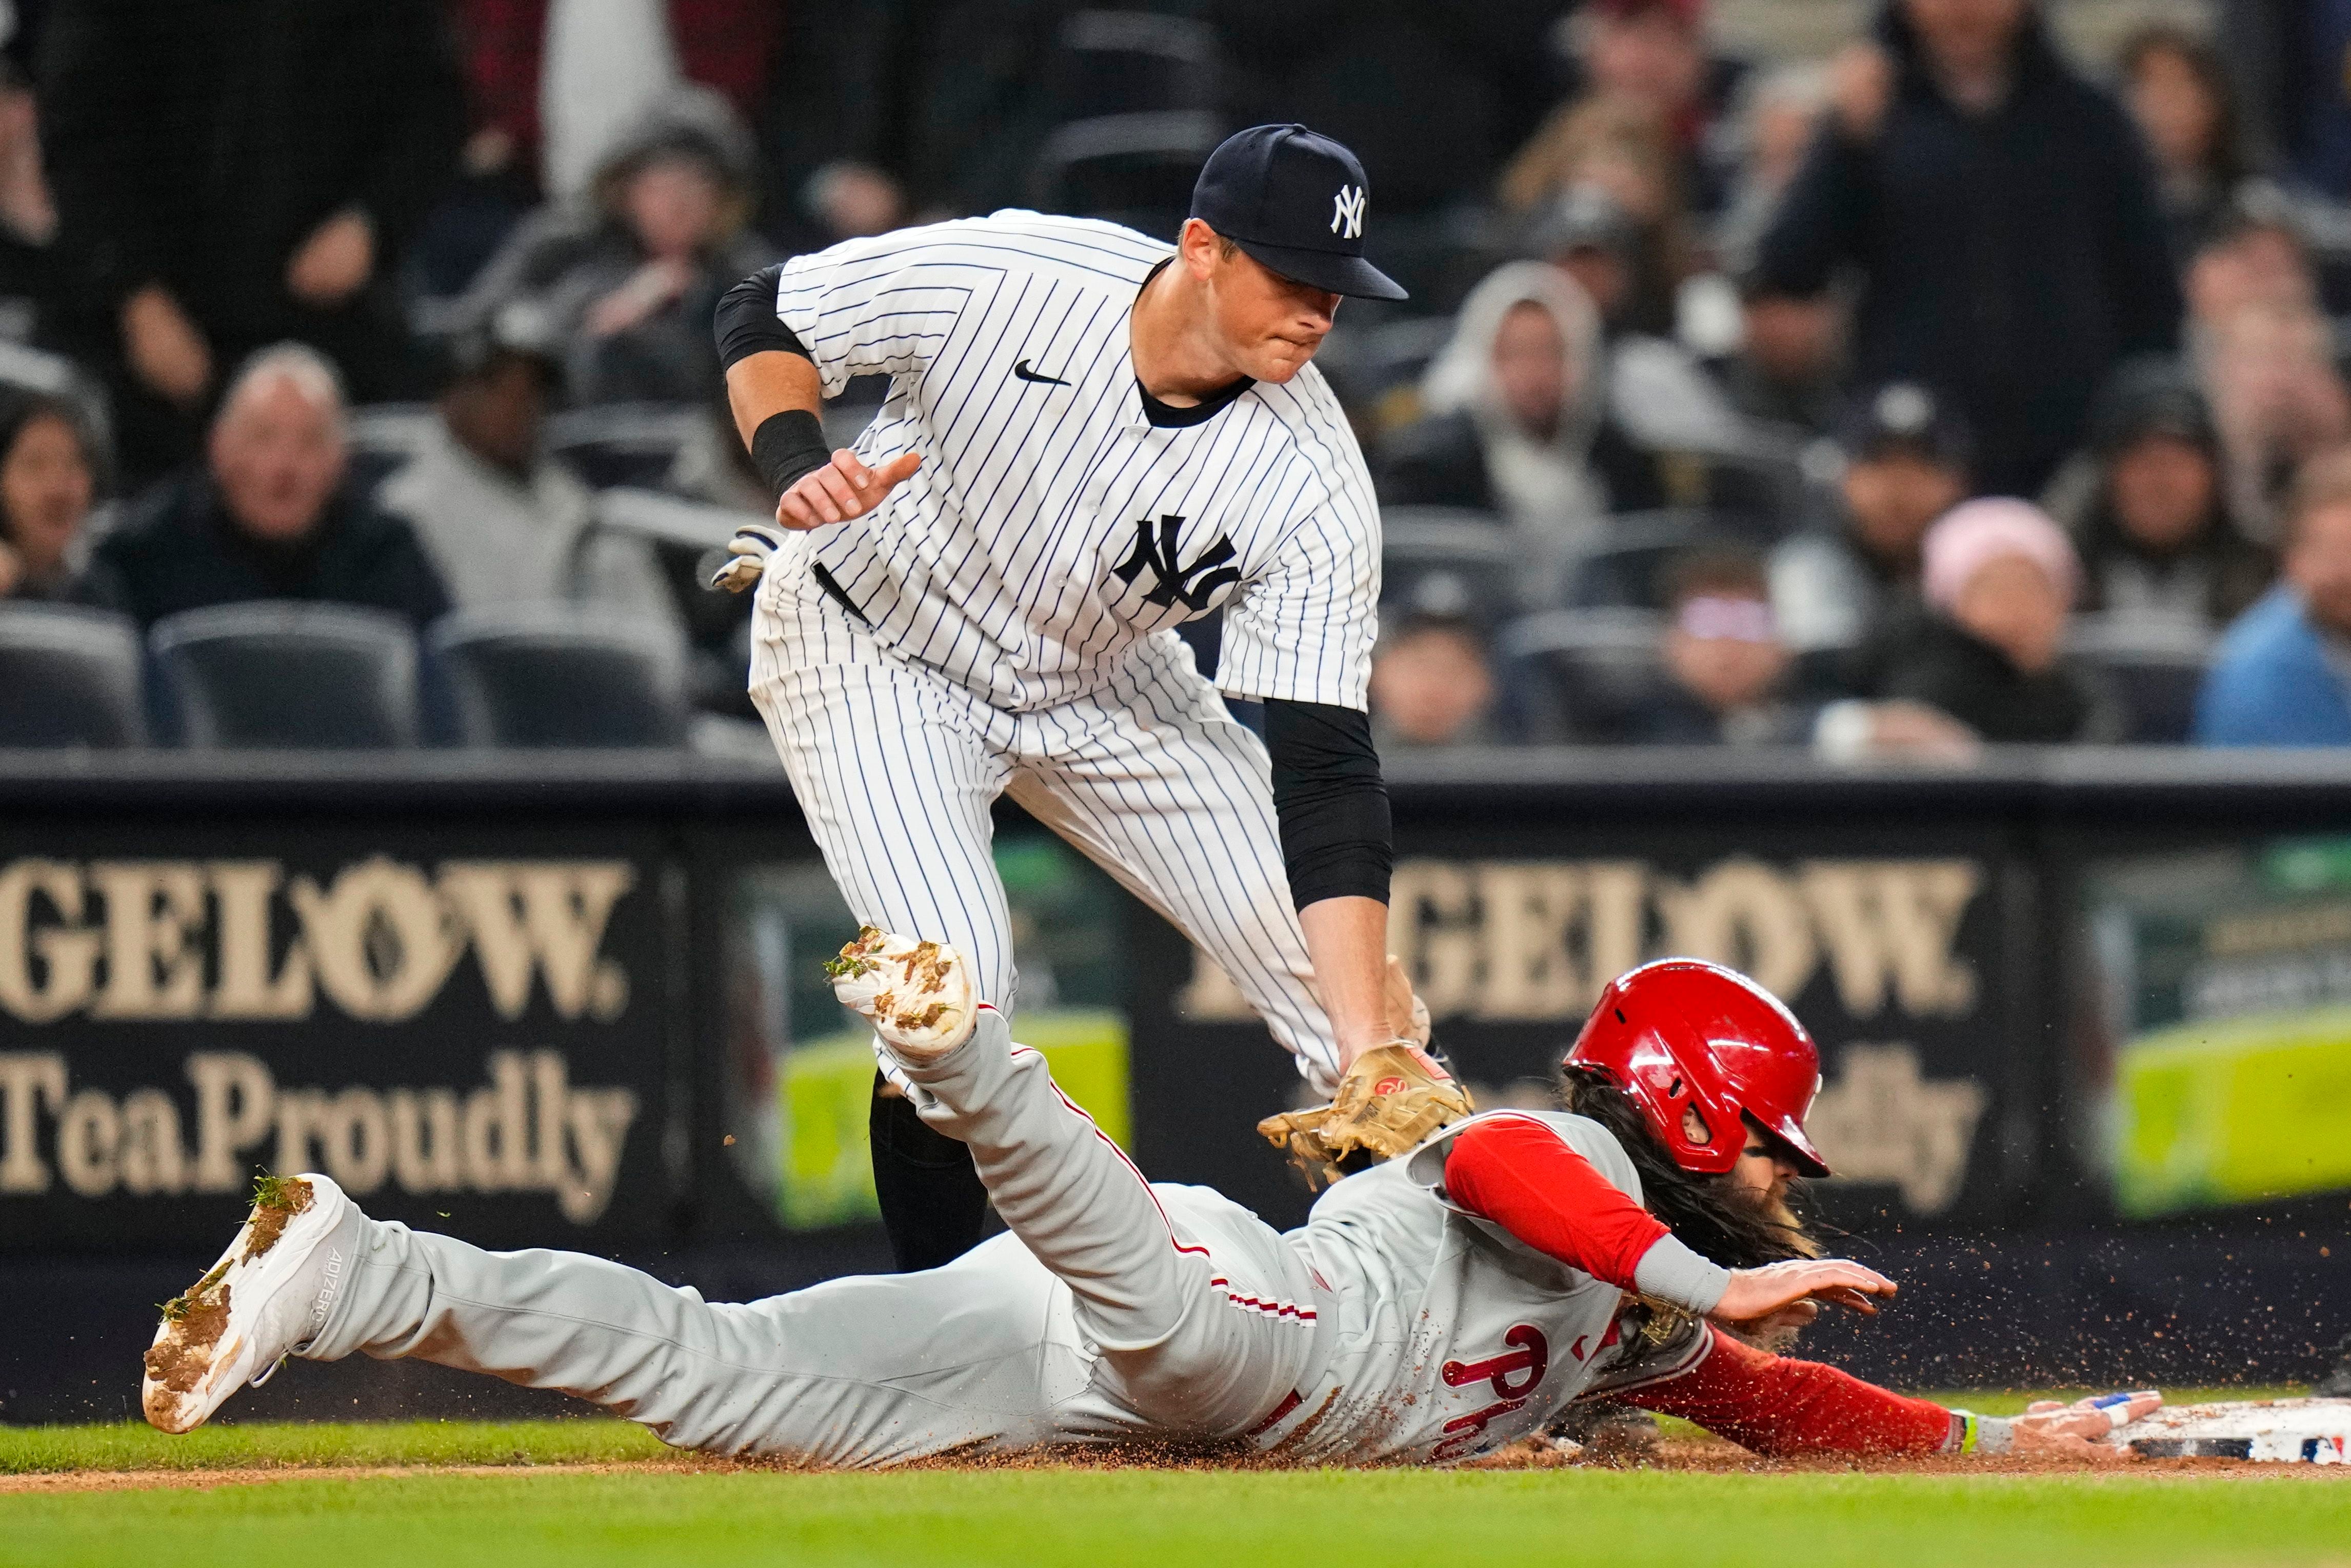 Not exactly must-see TV: Yankees-Red Sox series will feature a